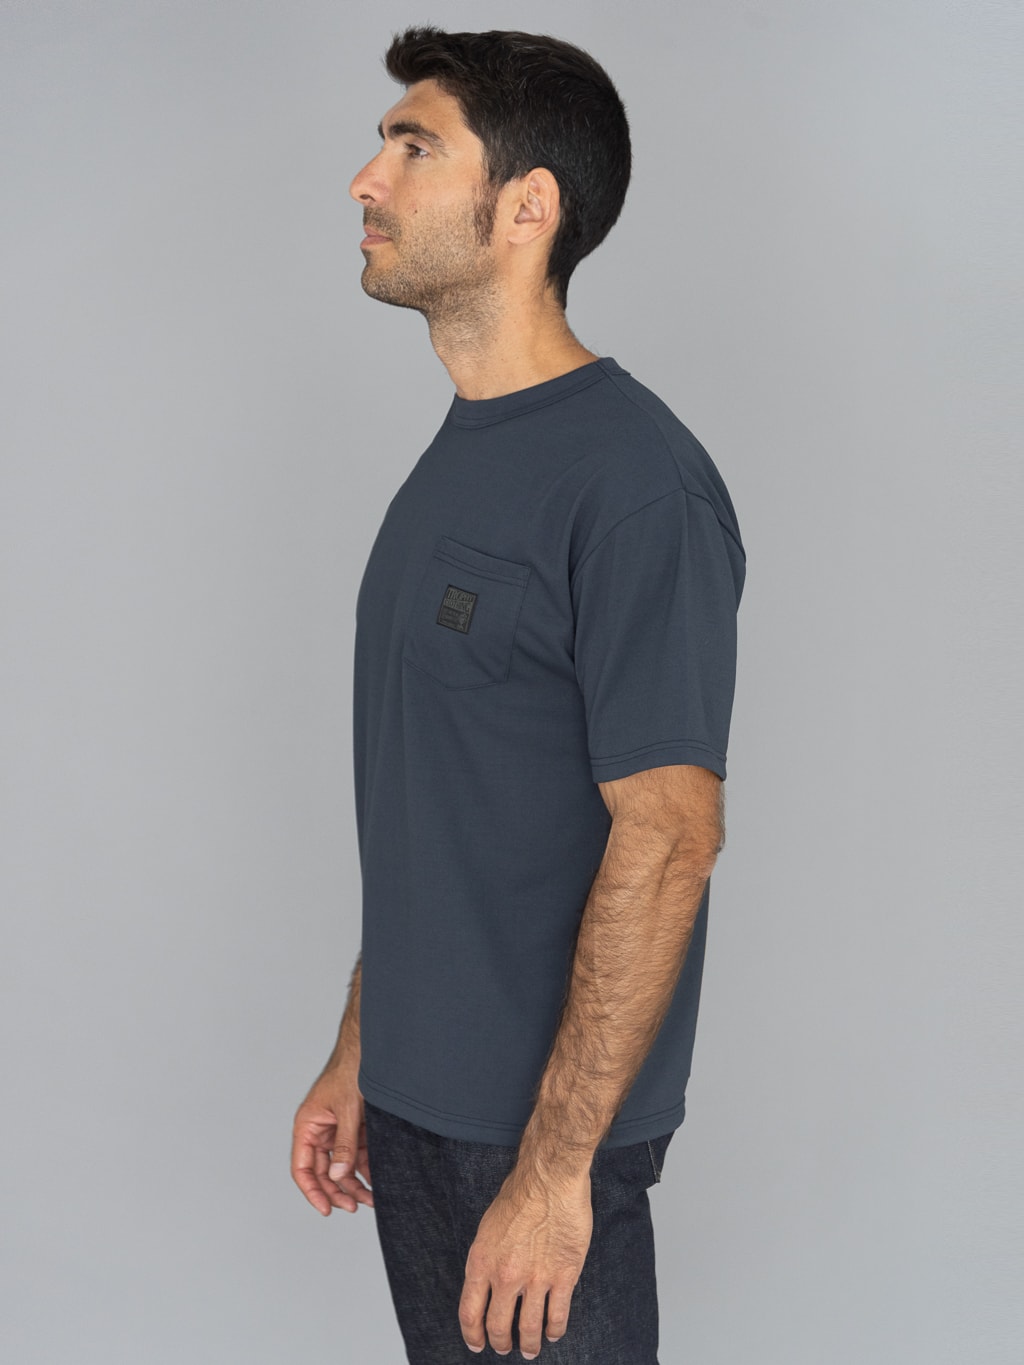 trophy clothing monochrome pc pocket tee charcoal  side fit